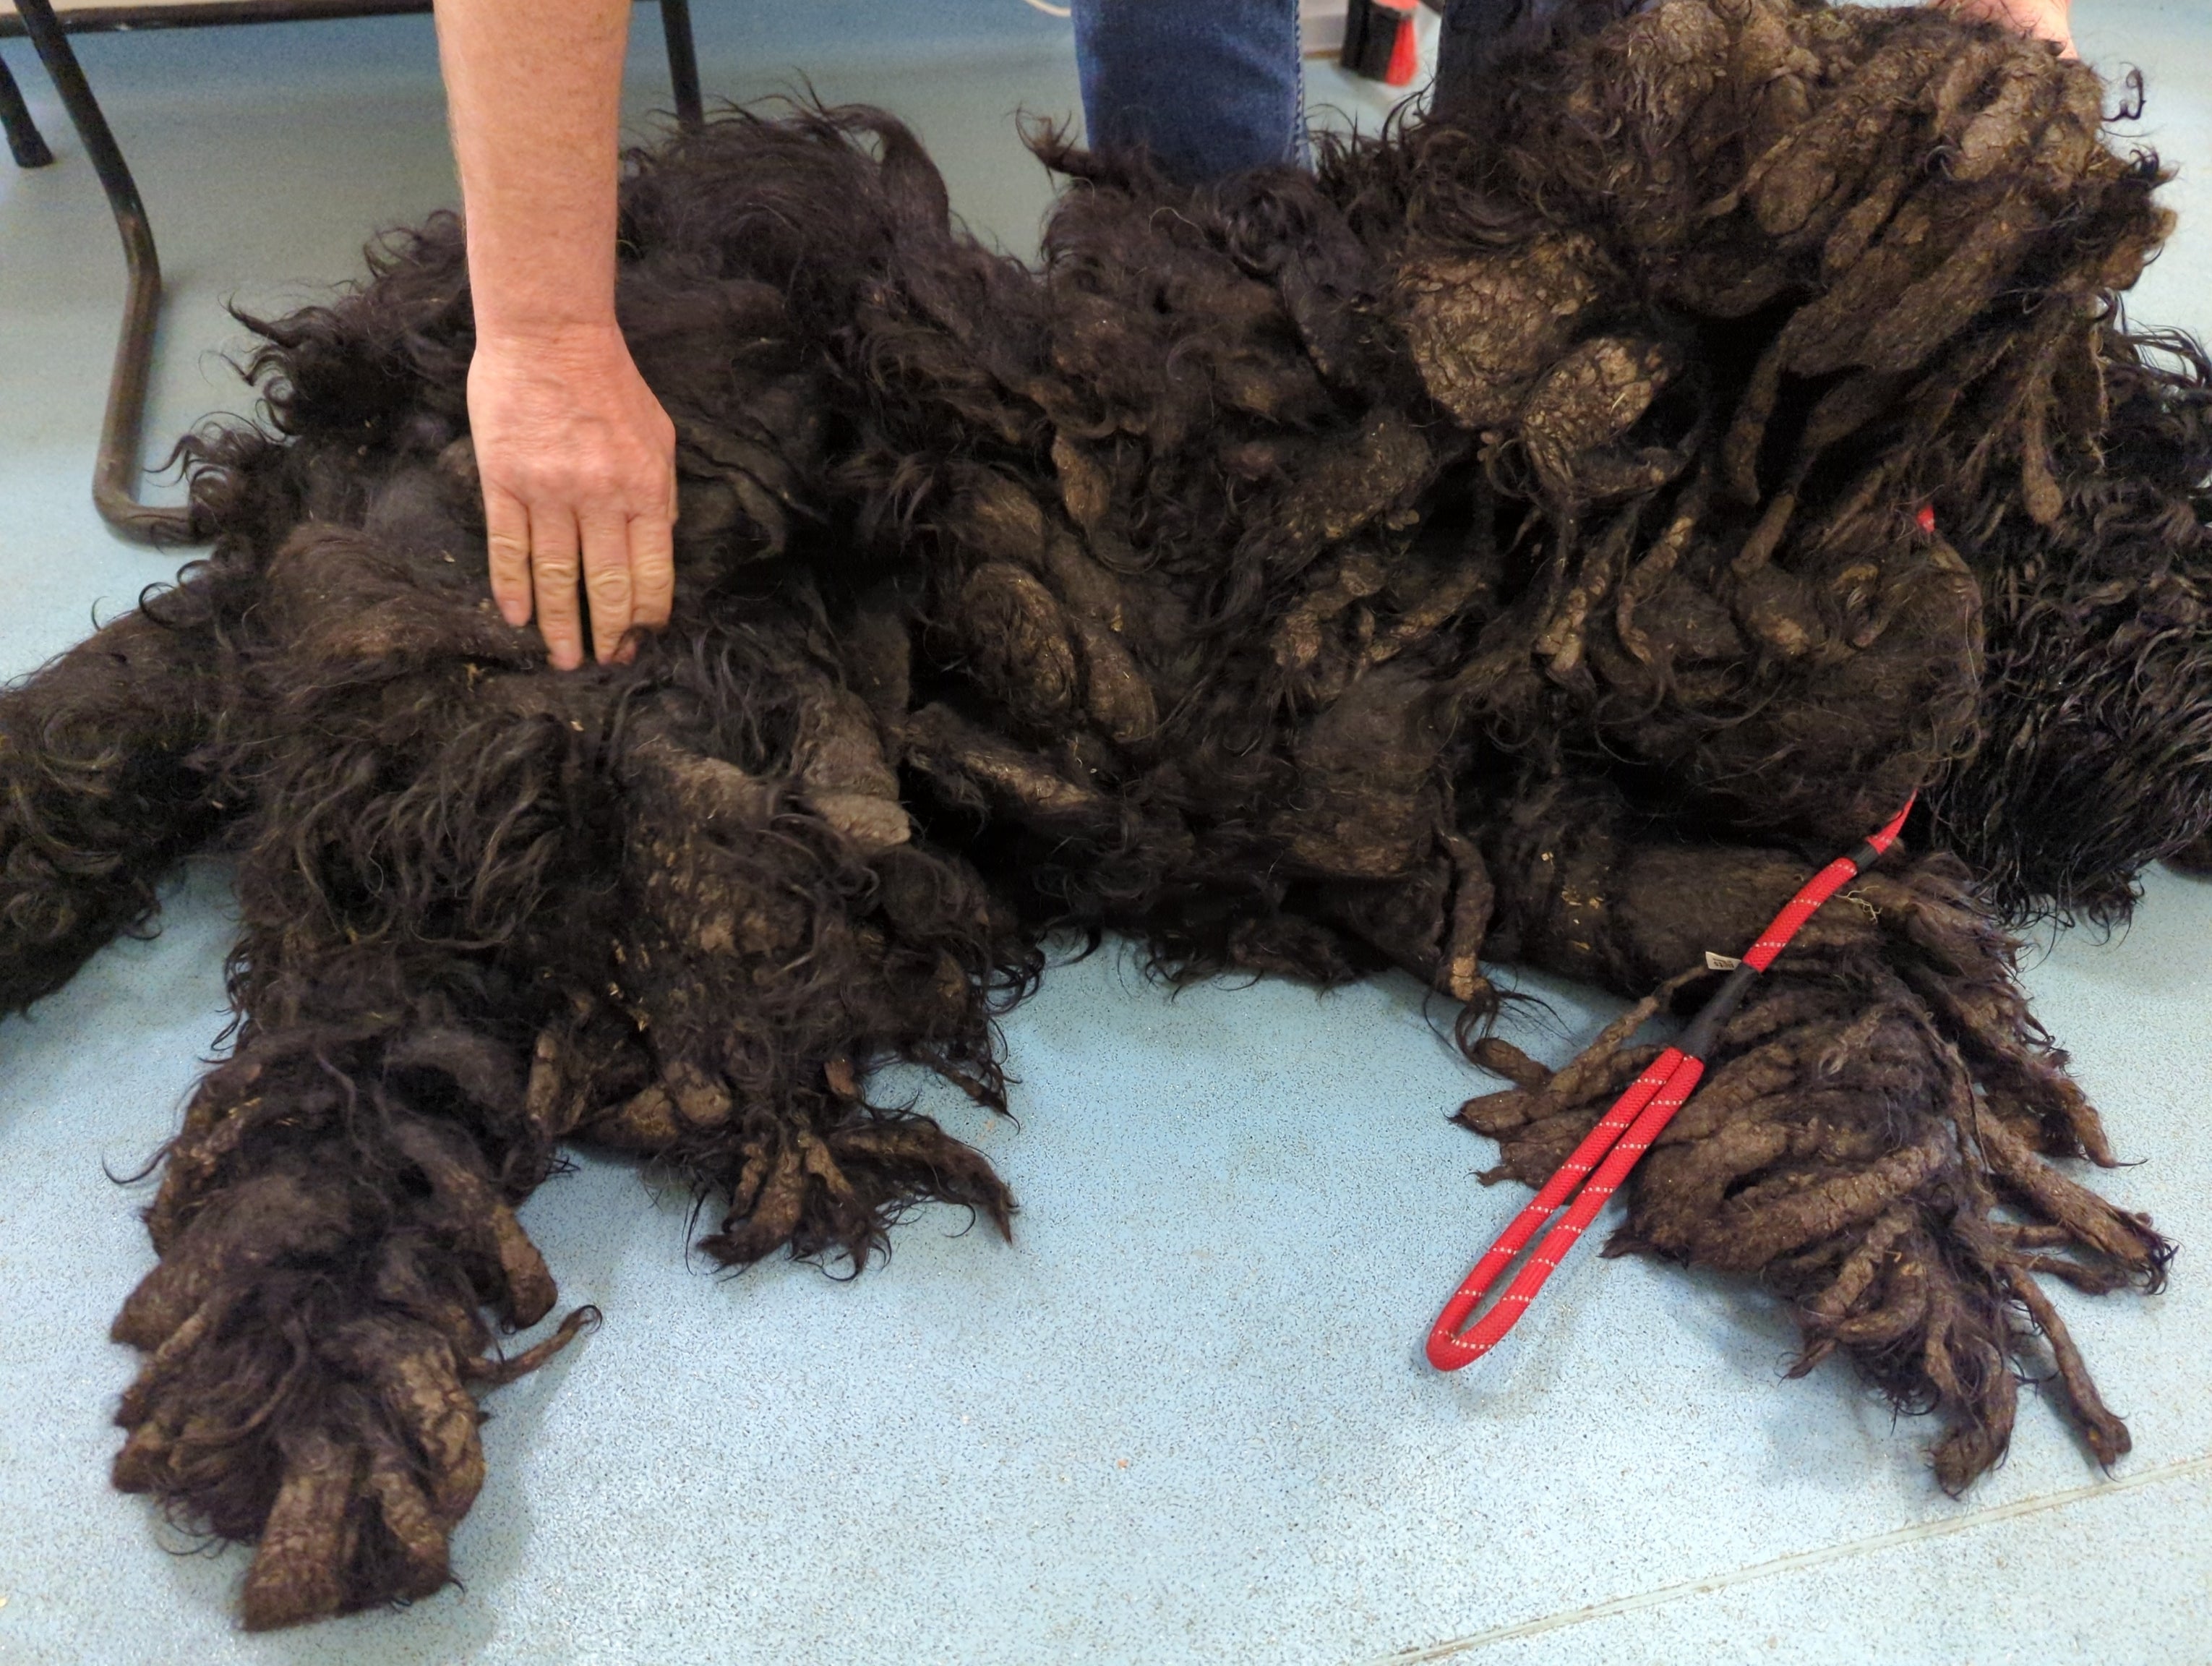 The Russian Terrier was so ungroomed it was carrying an extra 21 per cent of bodyweight